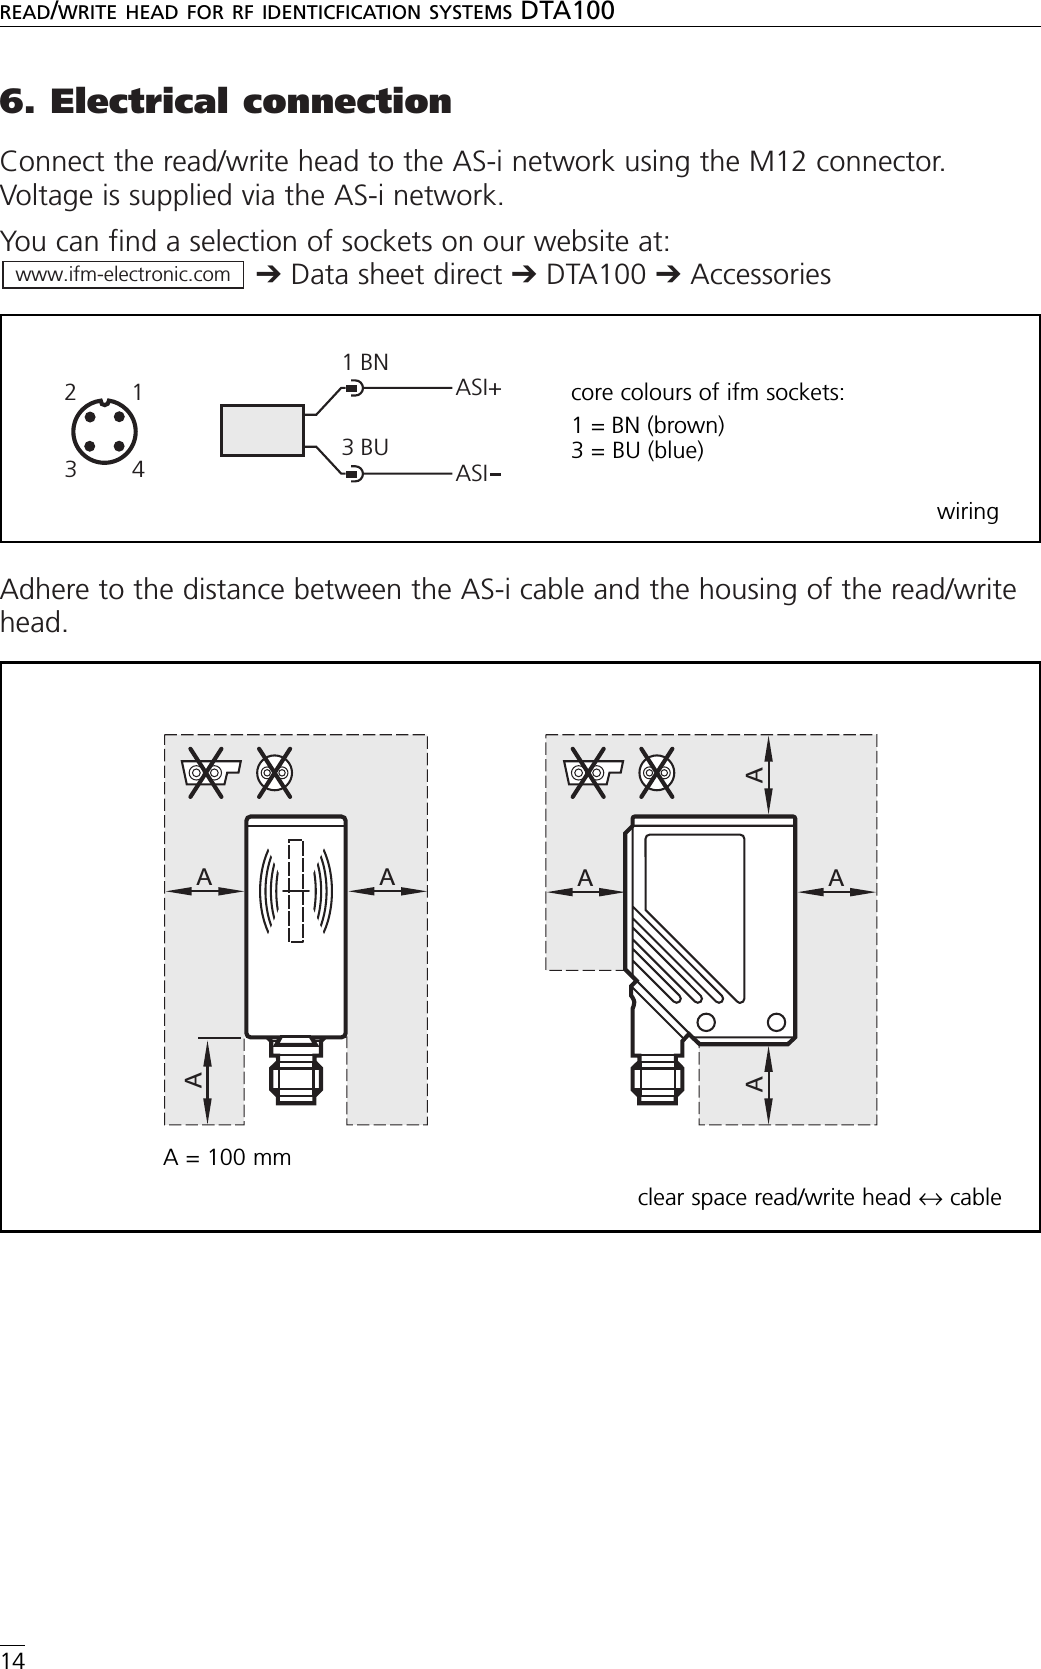 6. Electrical connectionConnect the read/write head to the AS-i network using the M12 connector.Voltage is supplied via the AS-i network.You can find a selection of sockets on our website at:➔Data sheet direct ➔DTA100 ➔AccessoriesAdhere to the distance between the AS-i cable and the housing of the read/writehead.www.ifm-electronic.comREAD/WRITE HEAD FOR RF IDENTICFICATION SYSTEMS DTA10014ASI+ASI13BNBUcore colours of ifm sockets:1 = BN (brown)3 = BU (blue)wiring4213AA AAAAAclear space read/write head ↔cableA = 100 mm